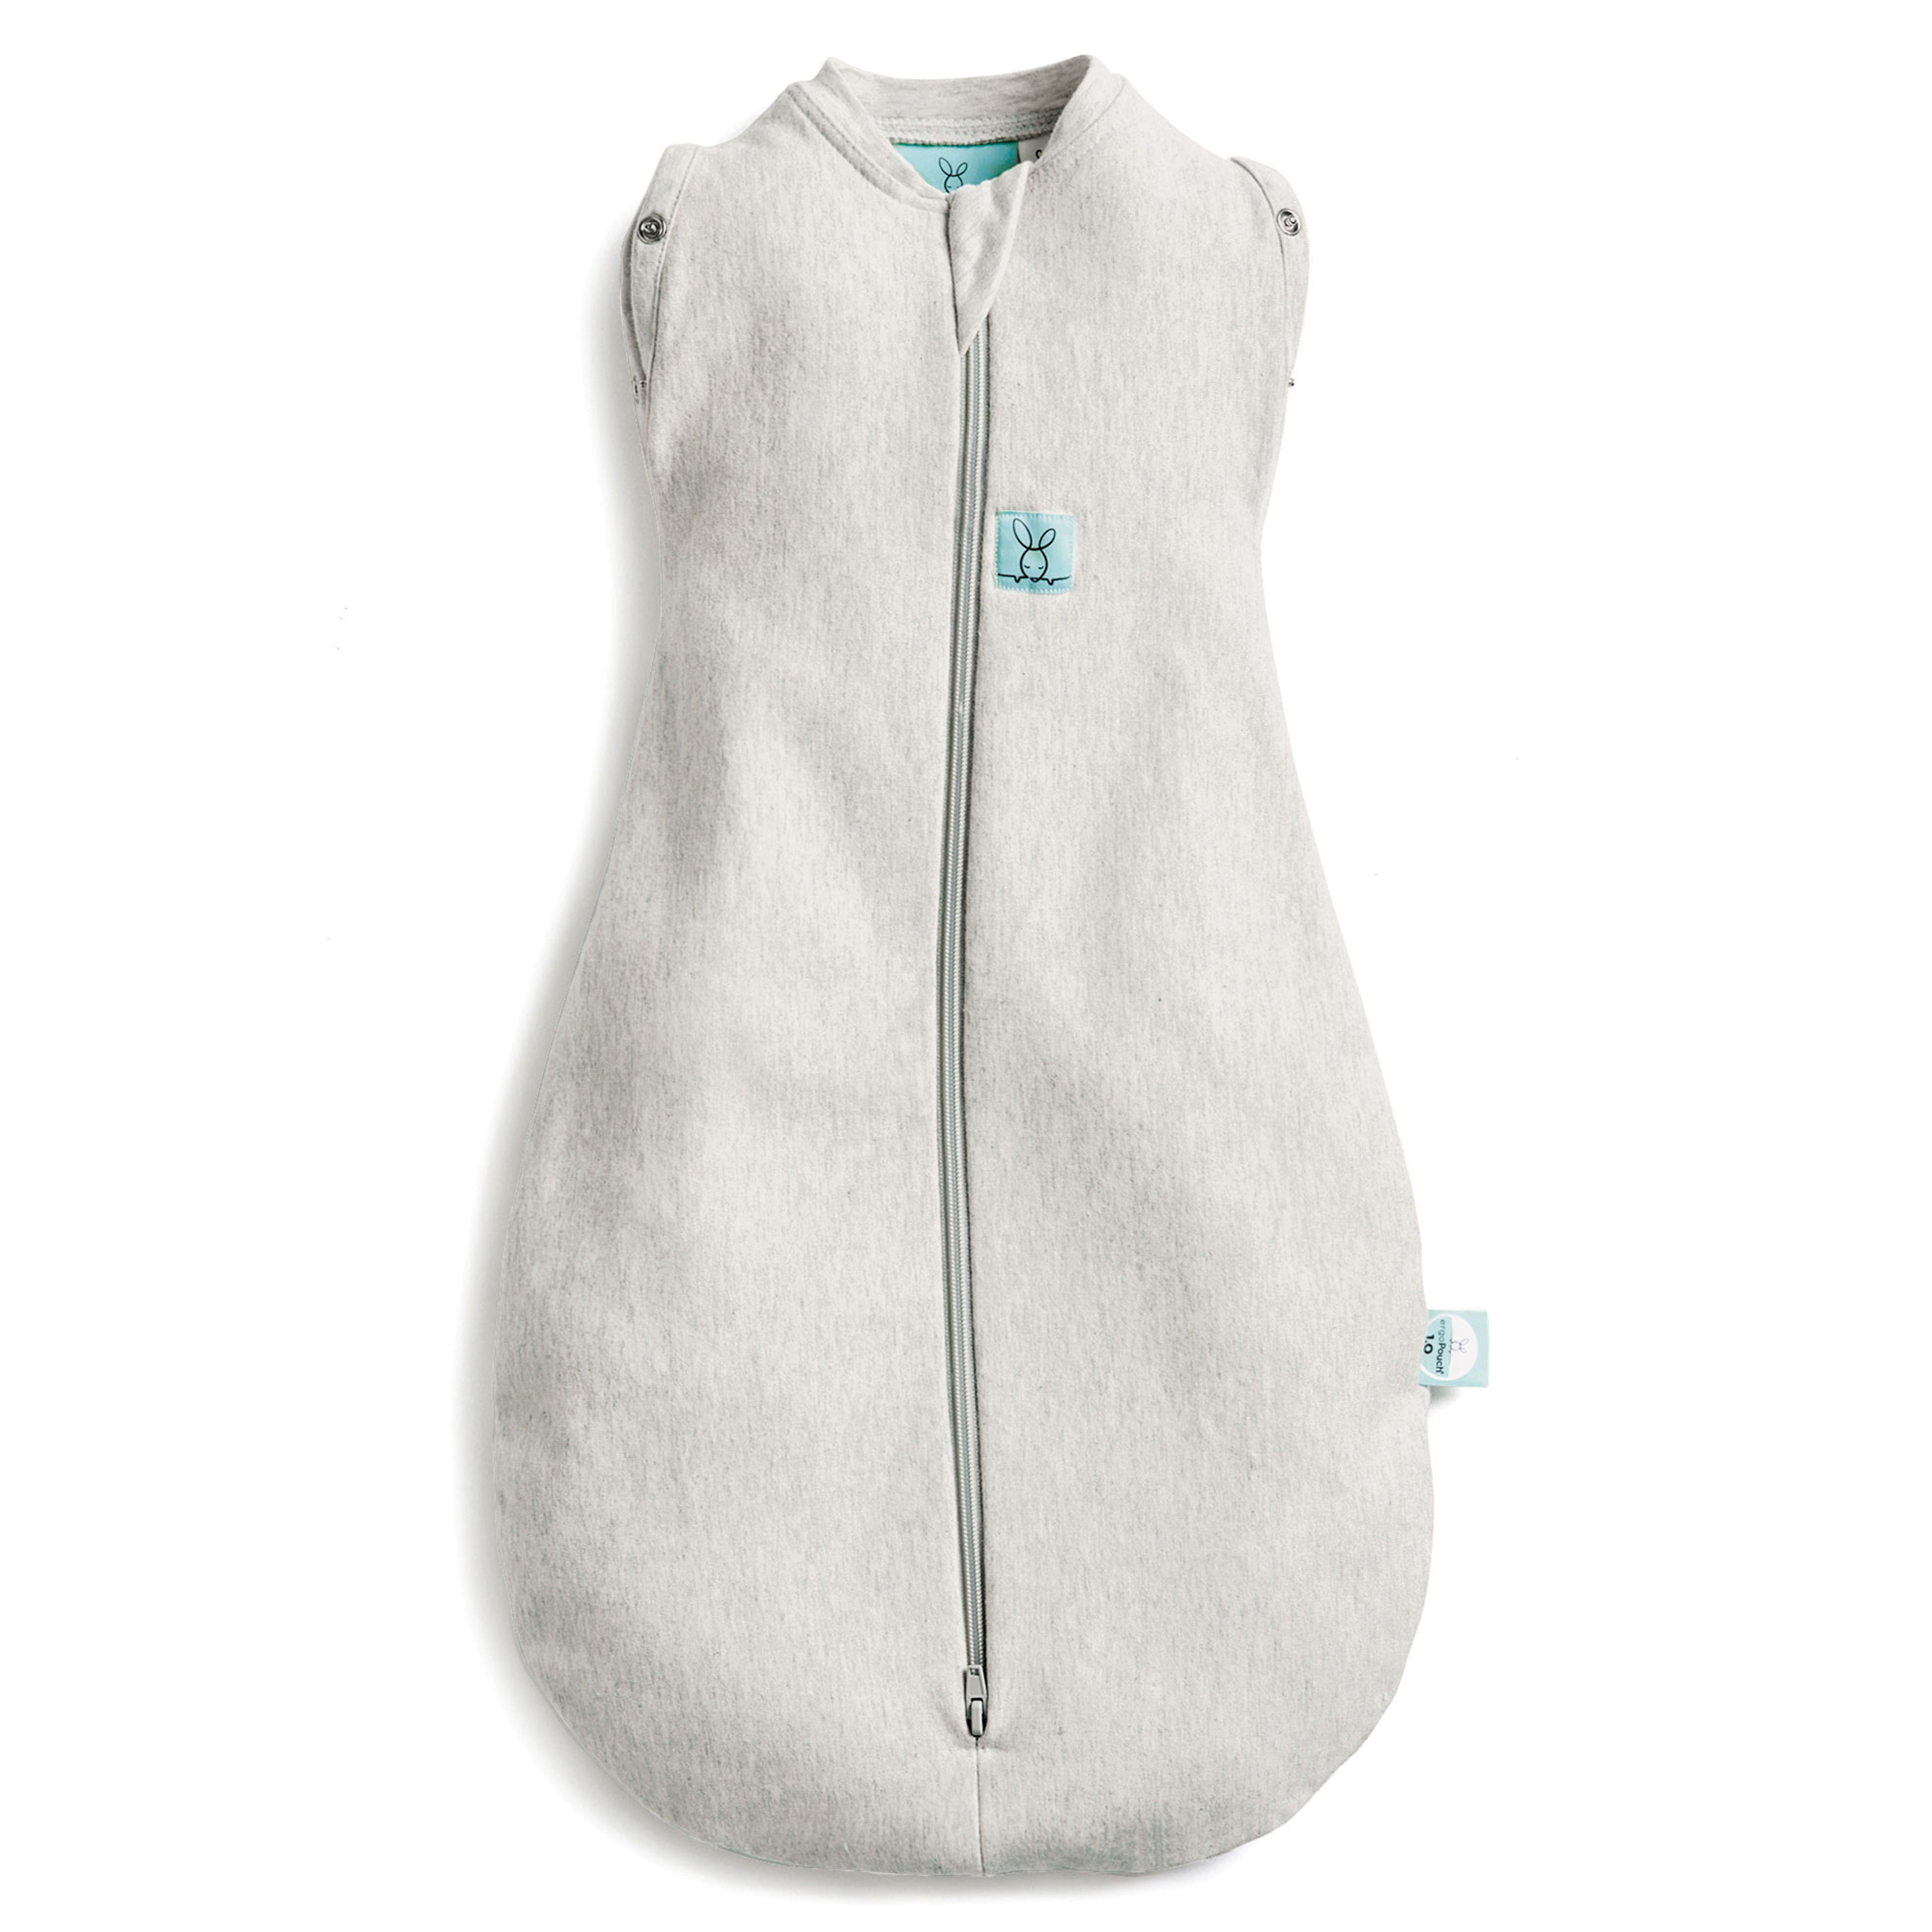 ergopouch-cocoon-swaddle-bag-1-0-tog-grey-marle-ergo-zepco-1-0t00-03mgm18- (1)